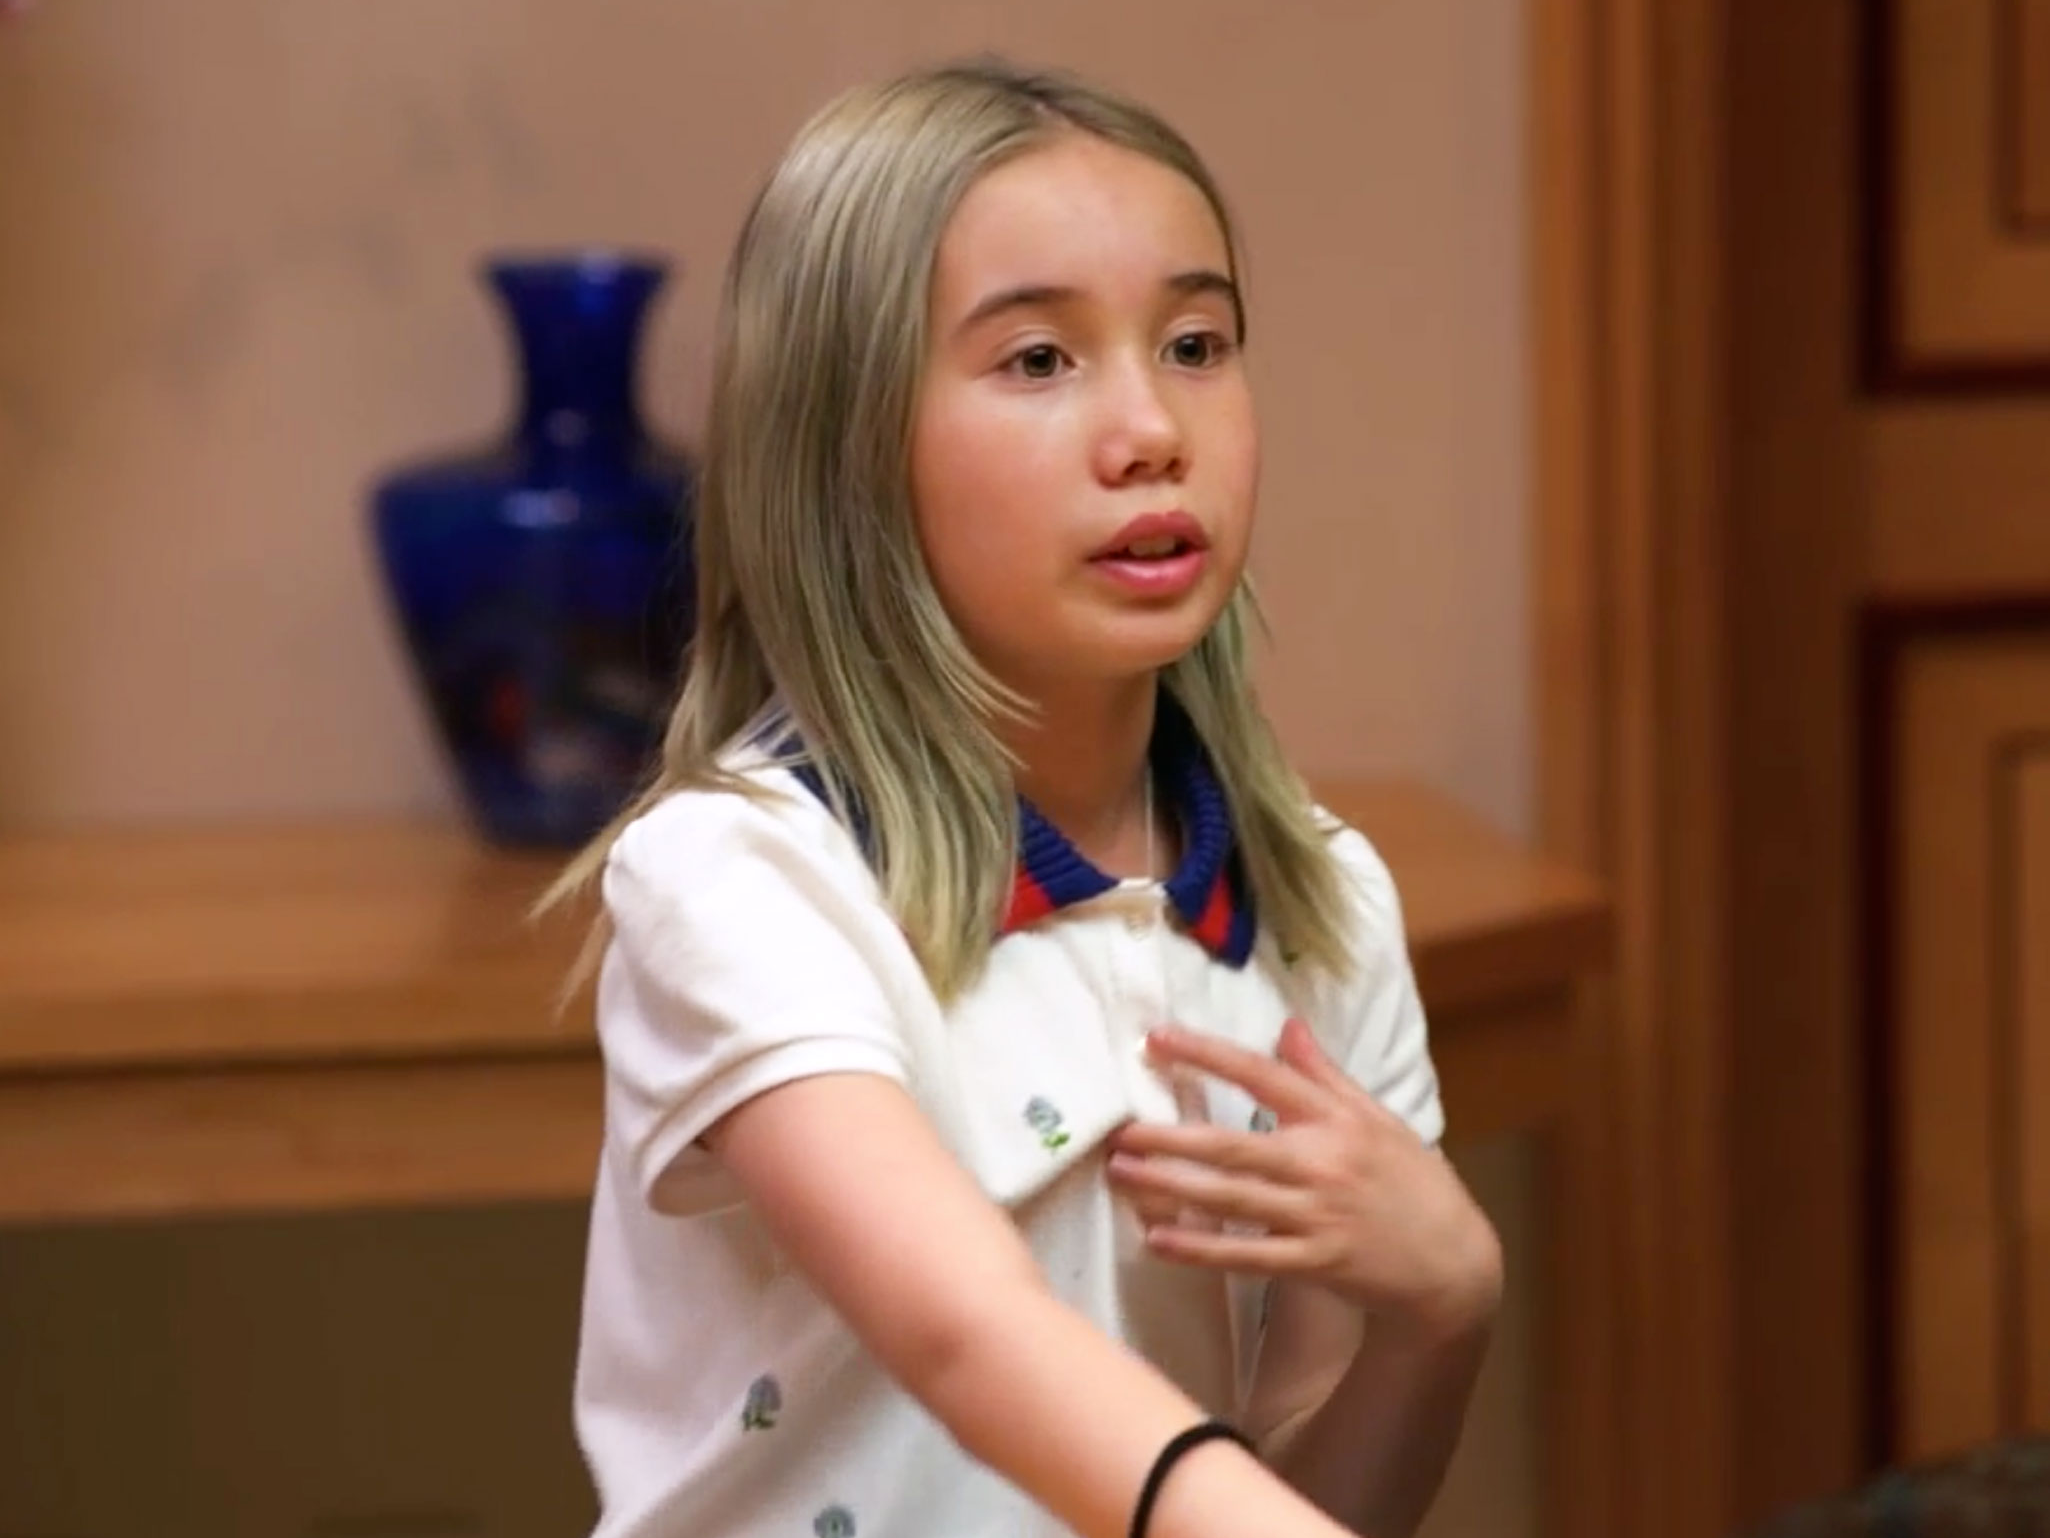 11yearold Instagram star Lil Tay went silent for months, and now